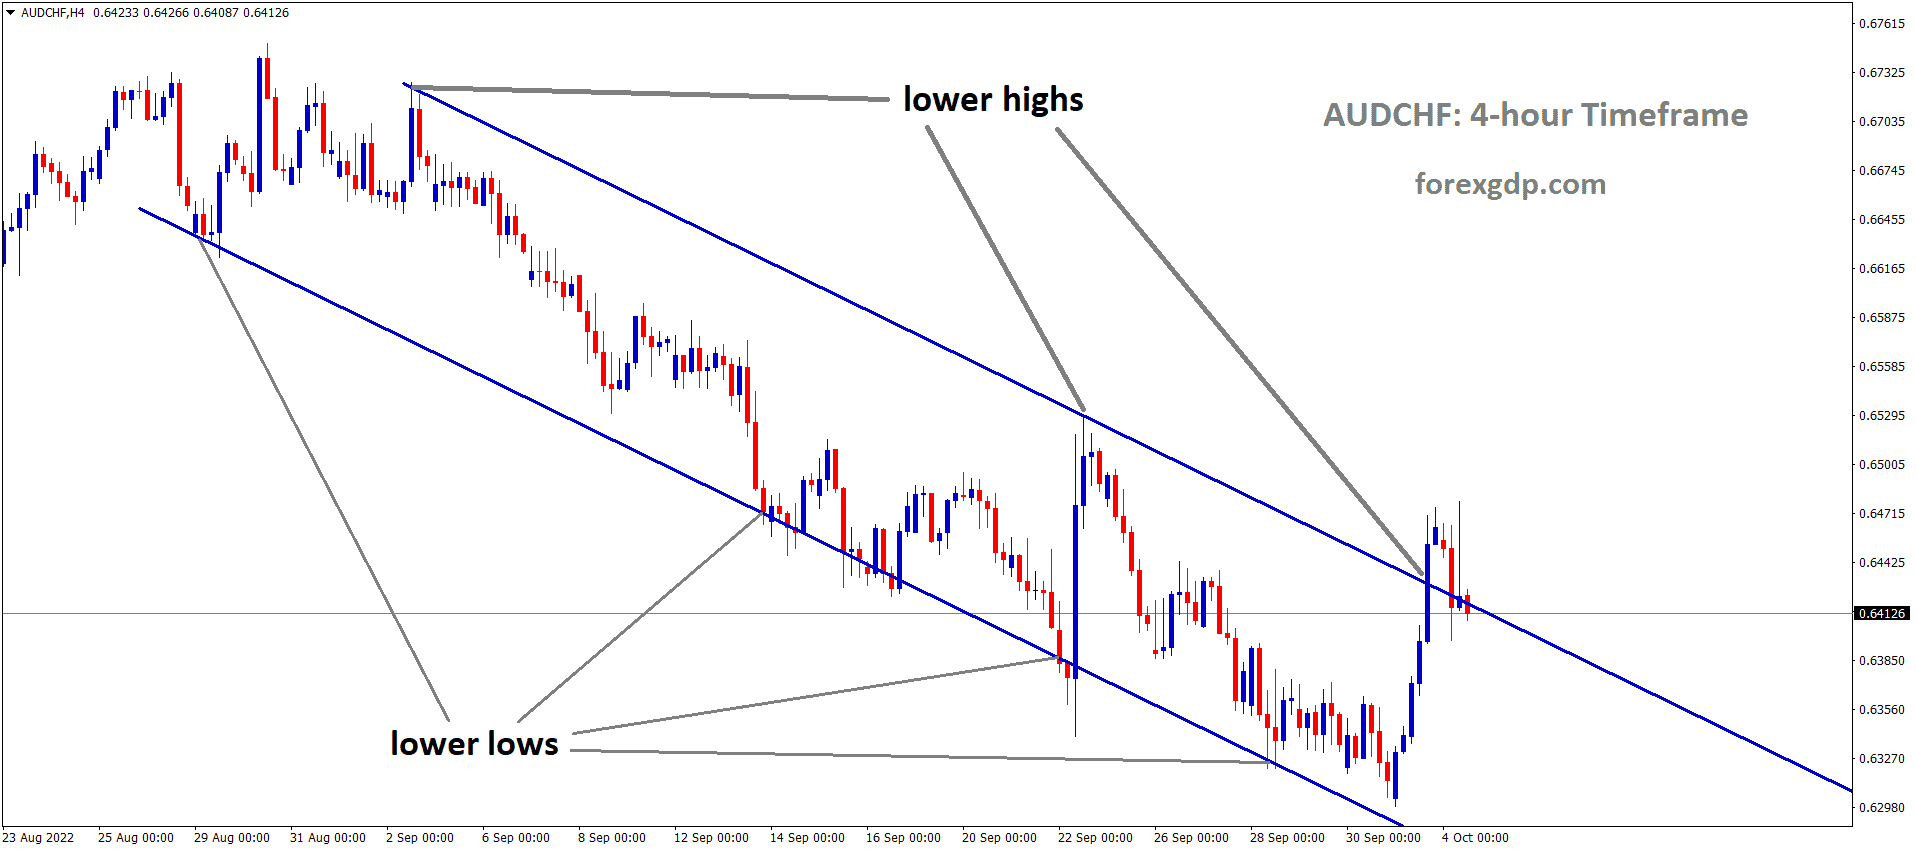 AUDCHF is moving in the Descending channel and the market has fallen from the lower high area of the channel